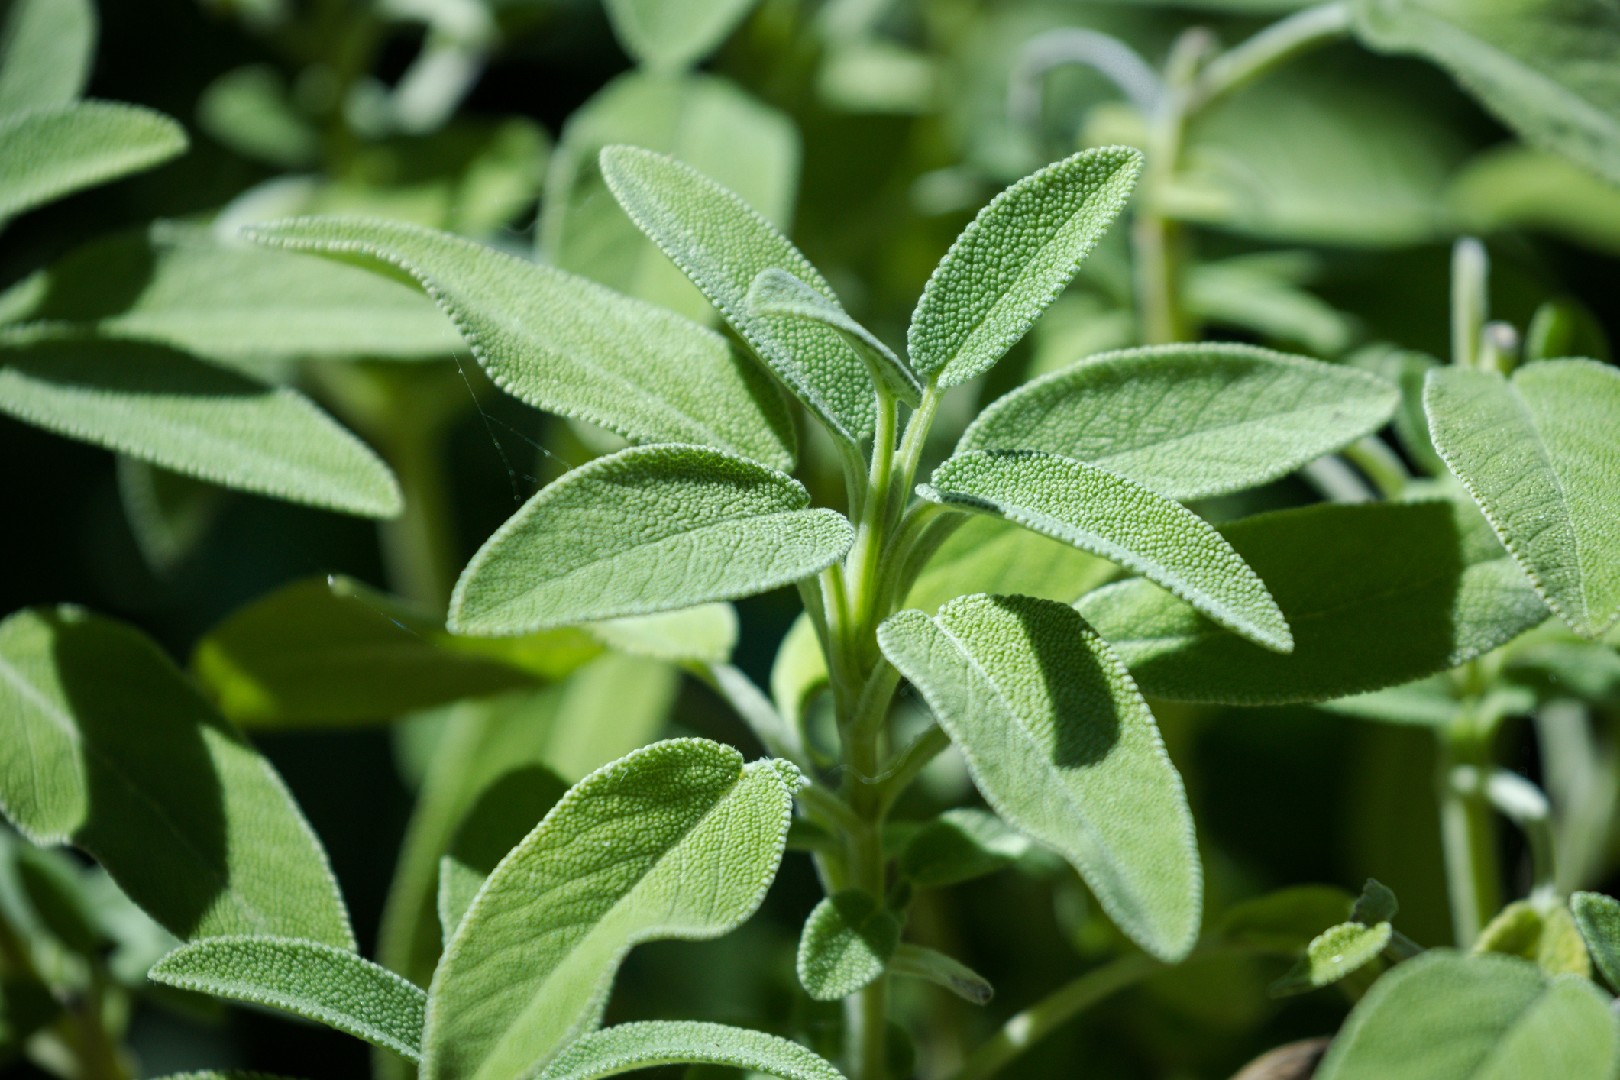 Sauge officinale (Salvia officinalis) - PictureThis